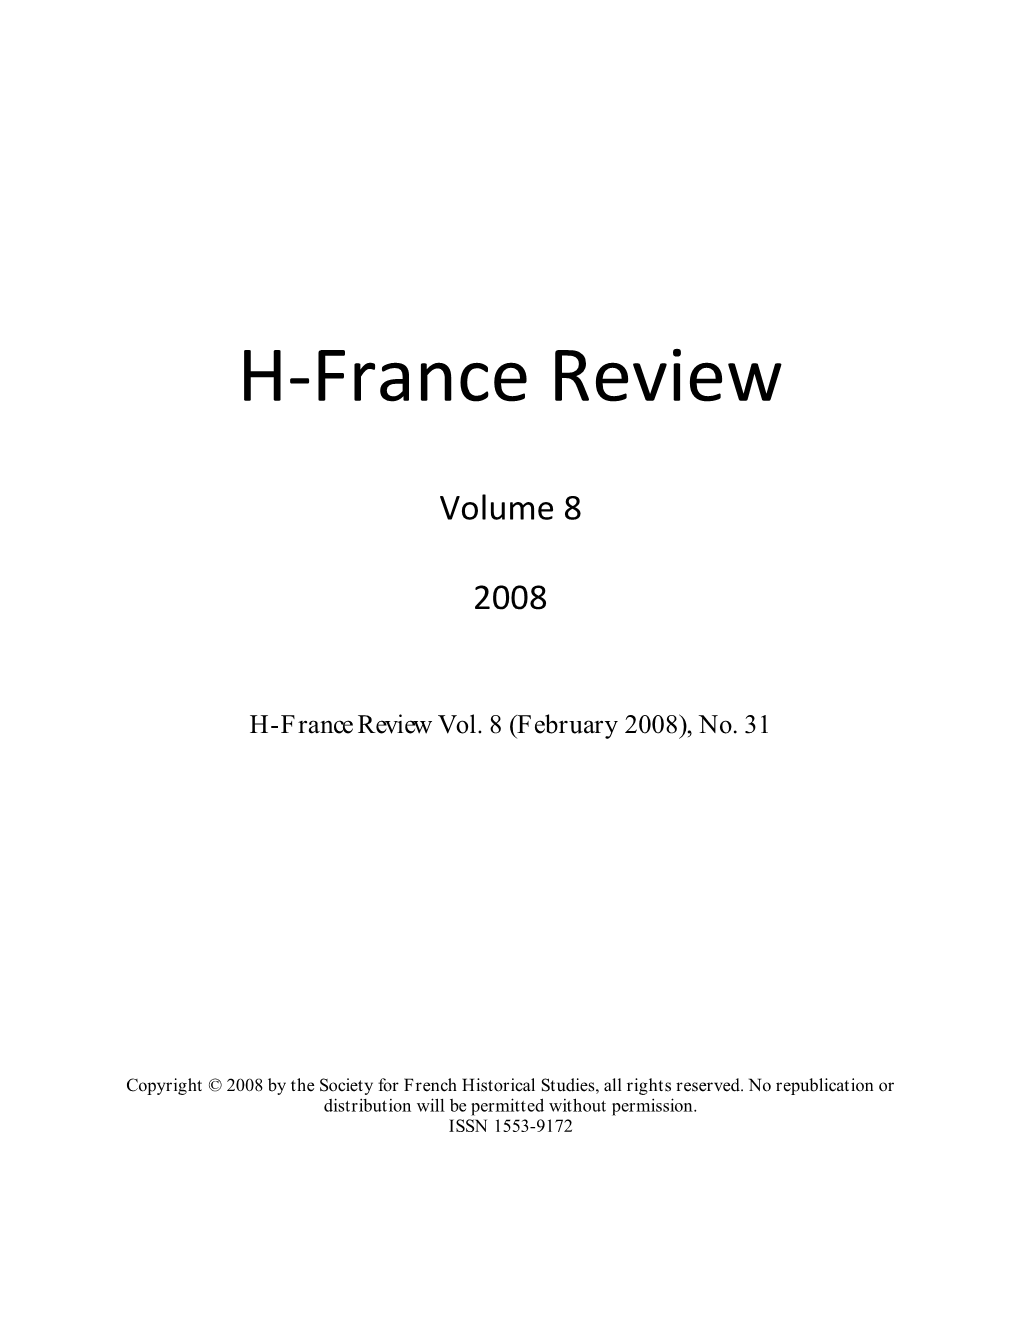 H-France Review